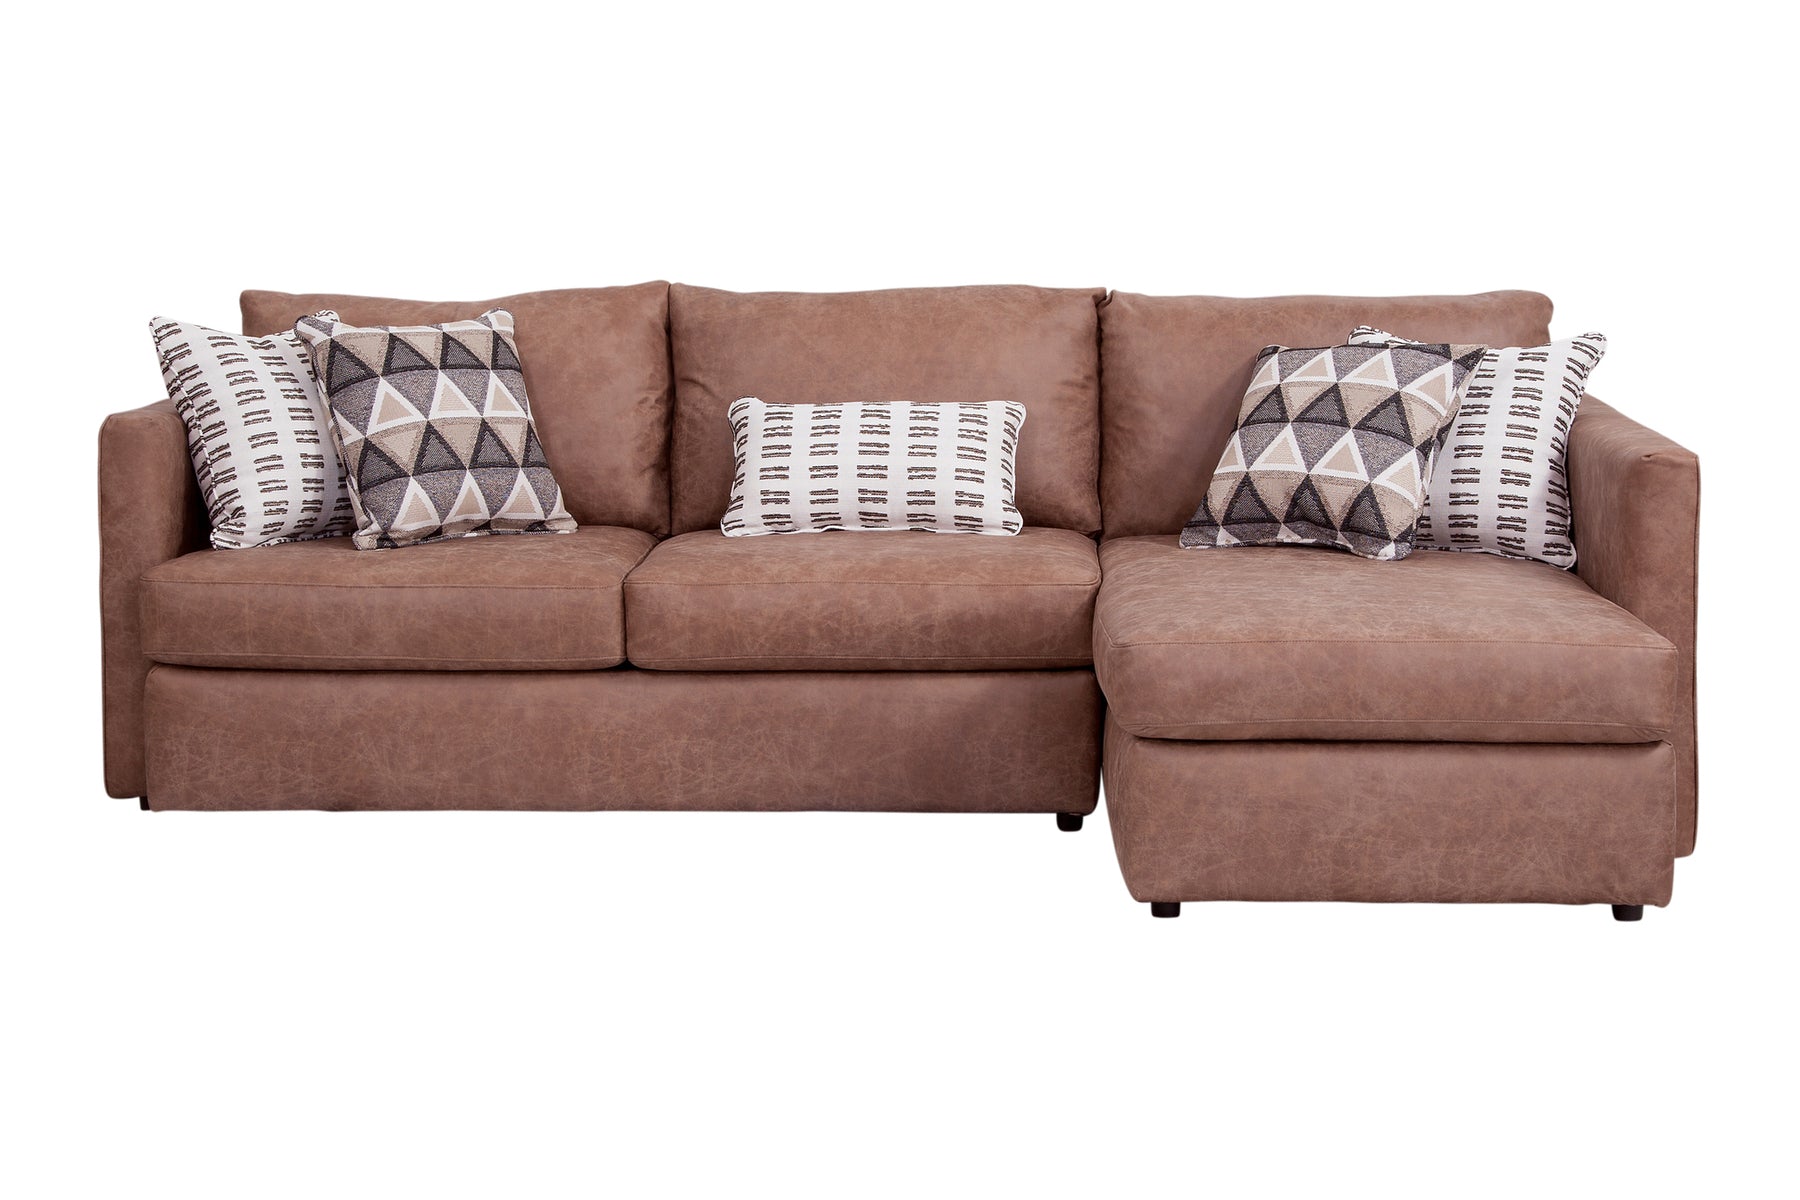 S298V7 2-Piece Sectional - Brown